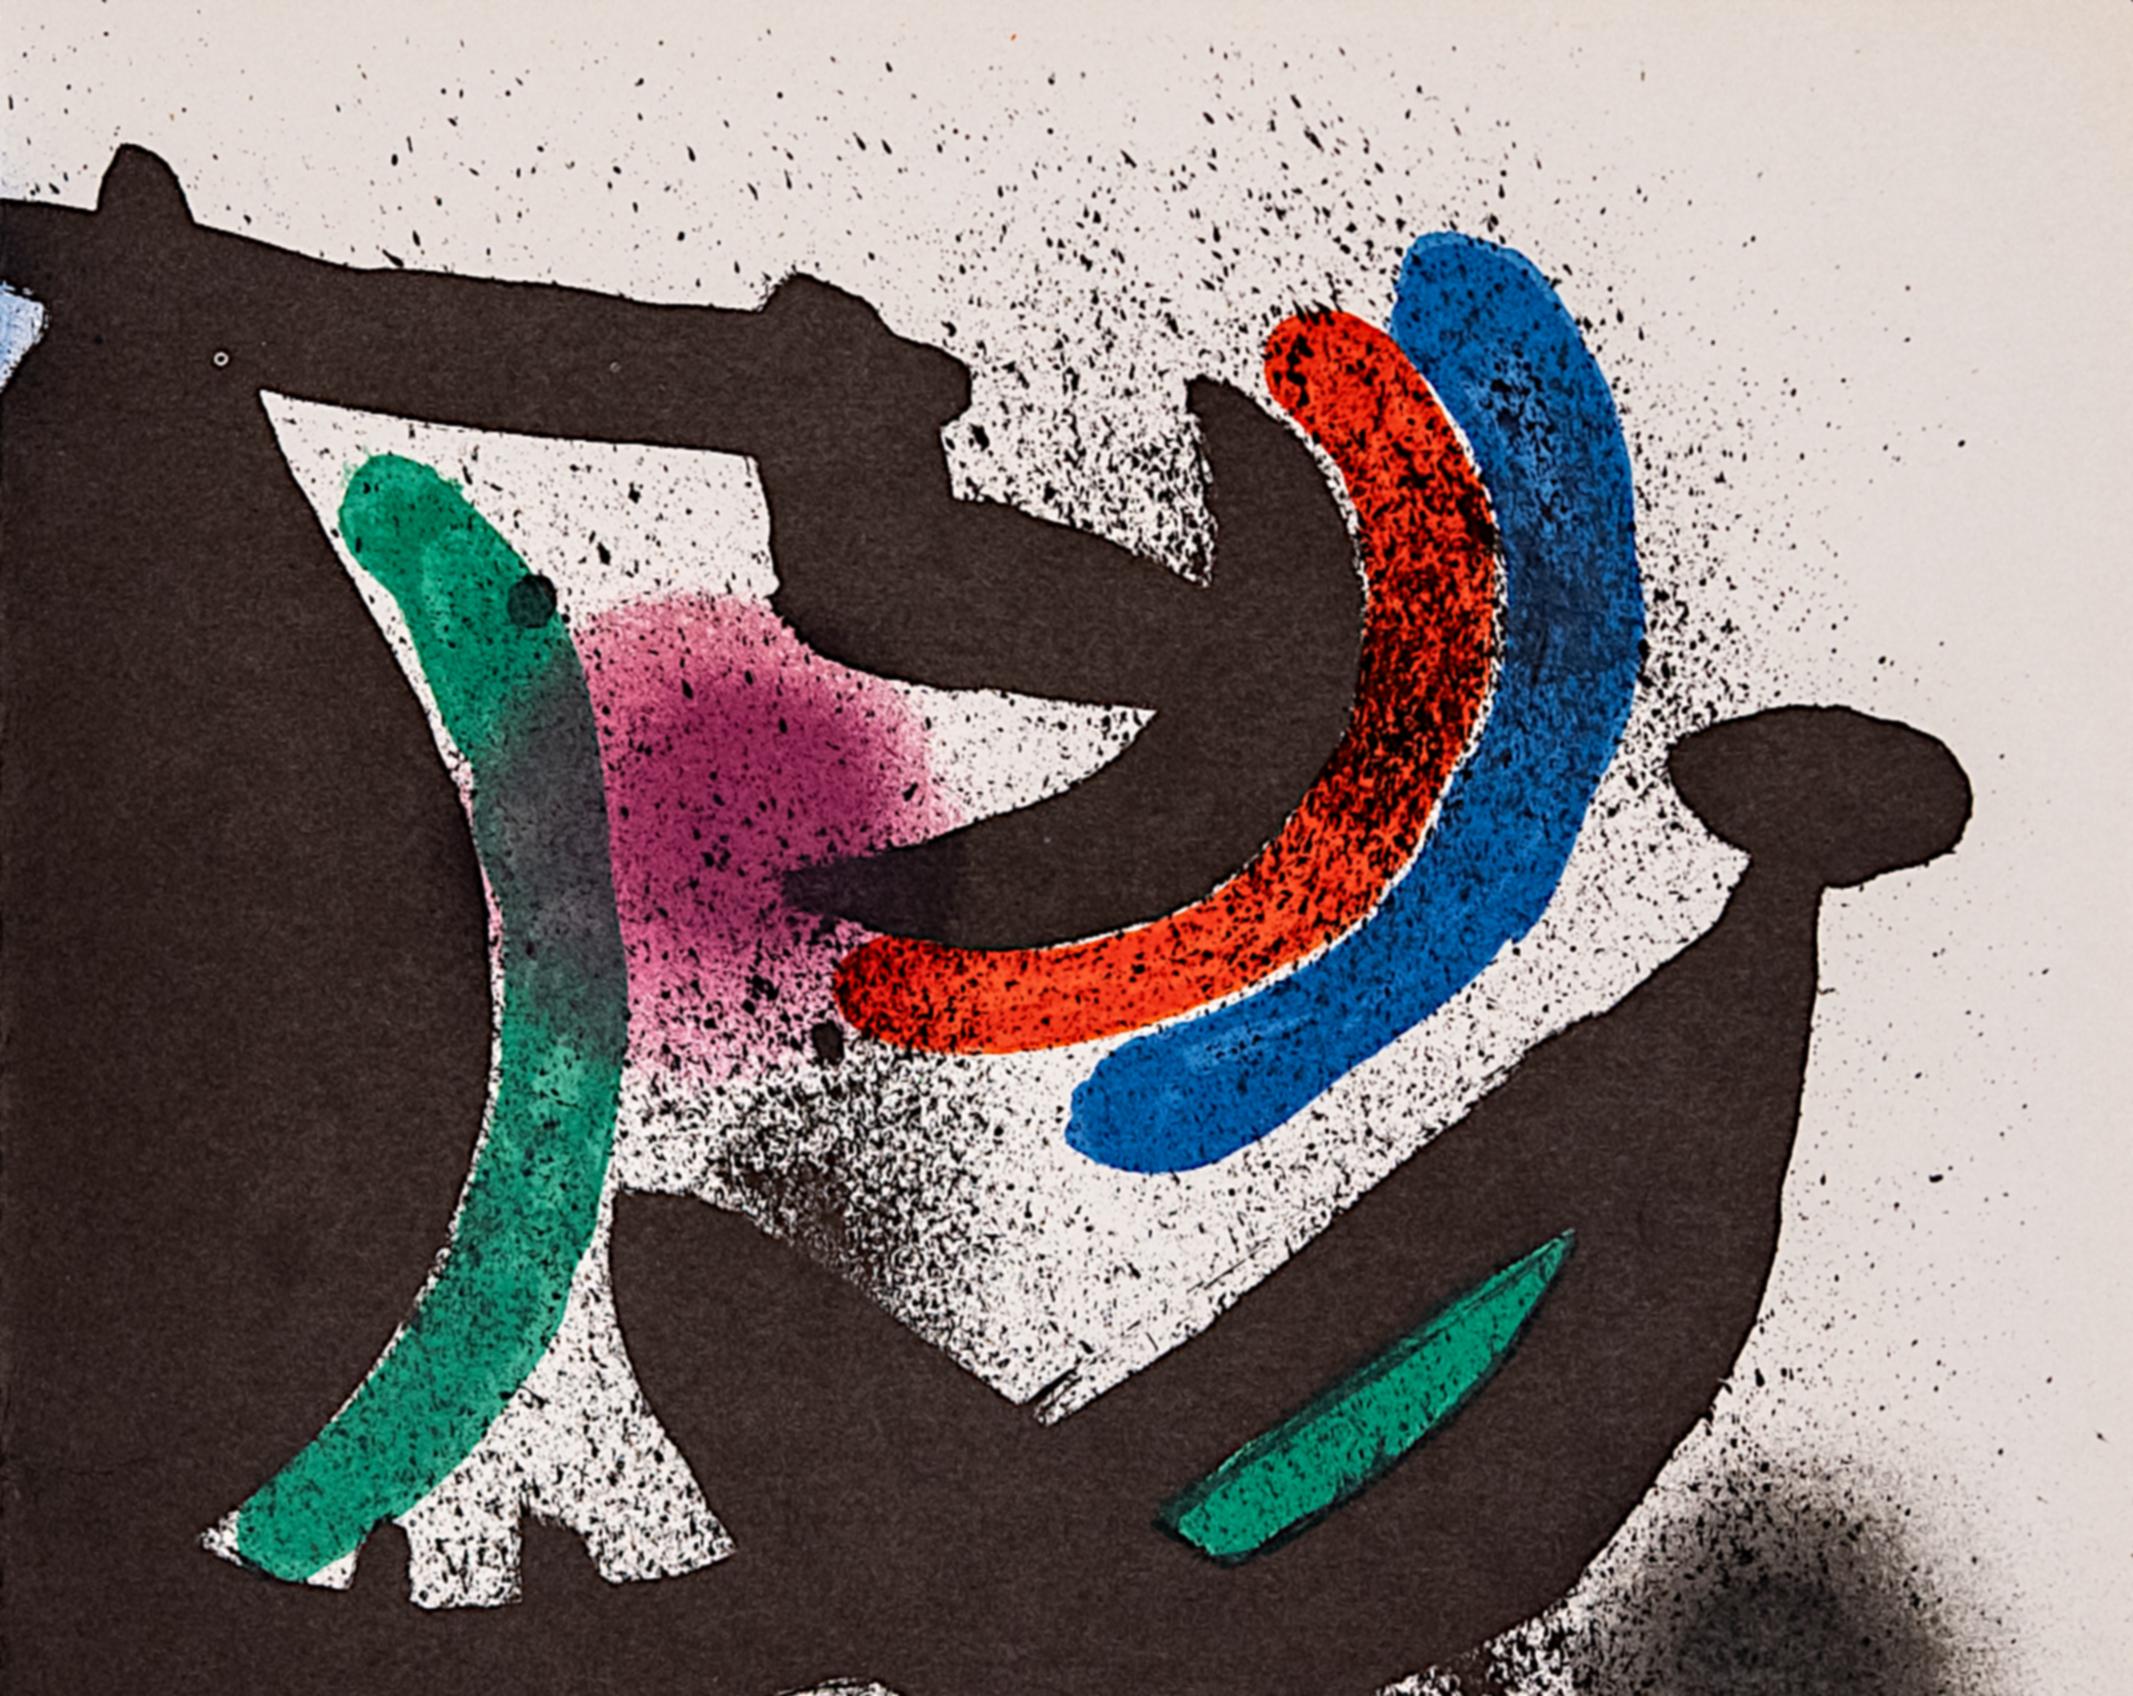 Litografo (Volume I) Spanish edition from 1972.

Catalogue of works: Mourlot 864.

Slight book fold in the centre of the paper.

Miró's development of a new pictorial language led to a consistent restriction to the primary colours black, green,